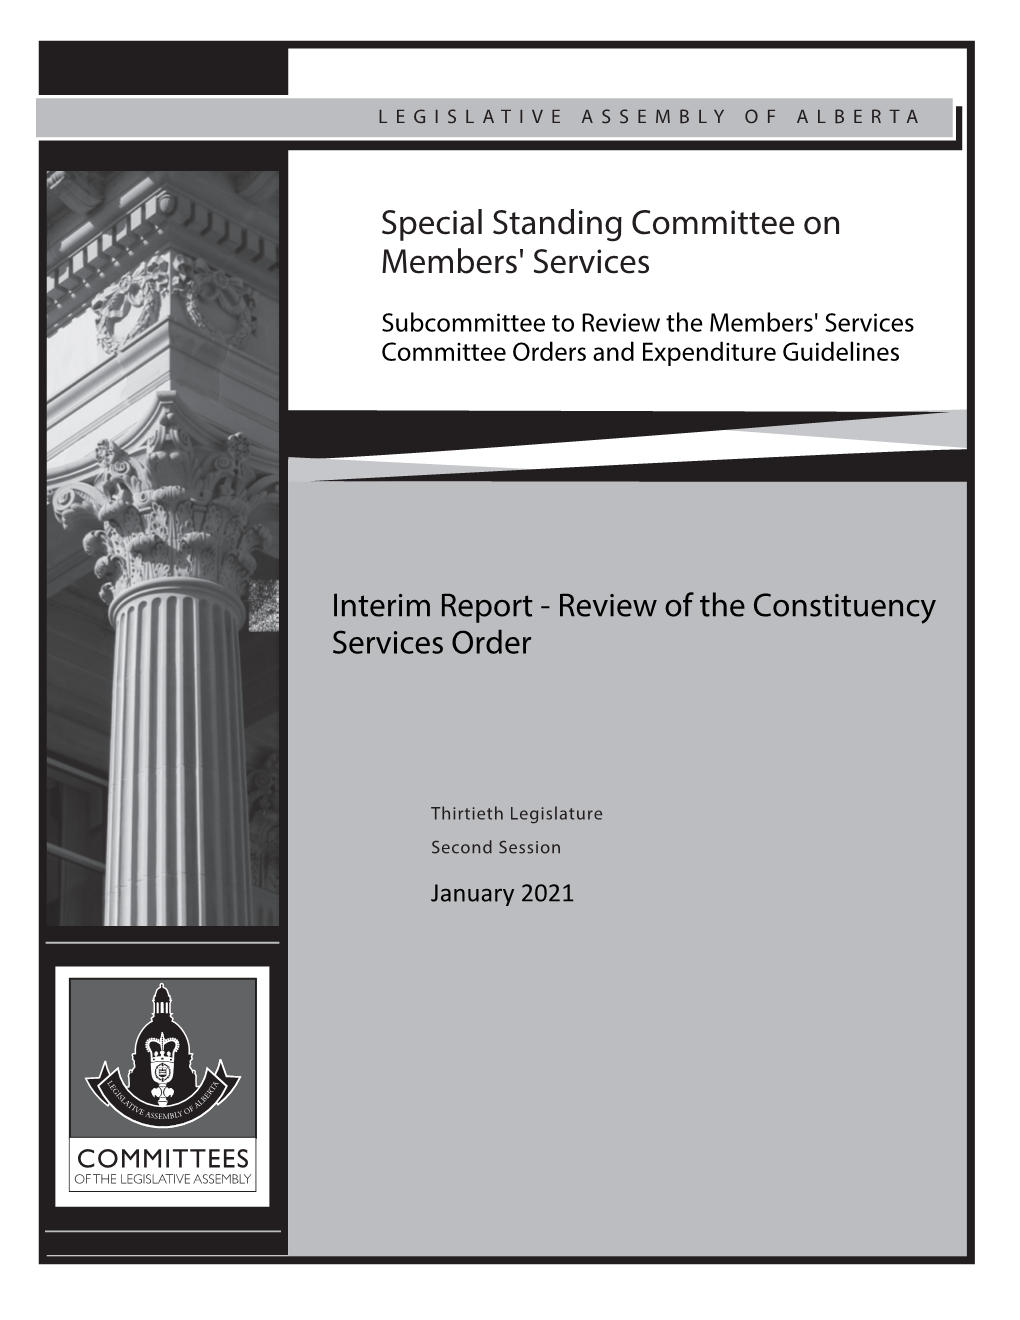 Subcommittee to Review the Members' Services Committee Orders and Expenditure Guidelines